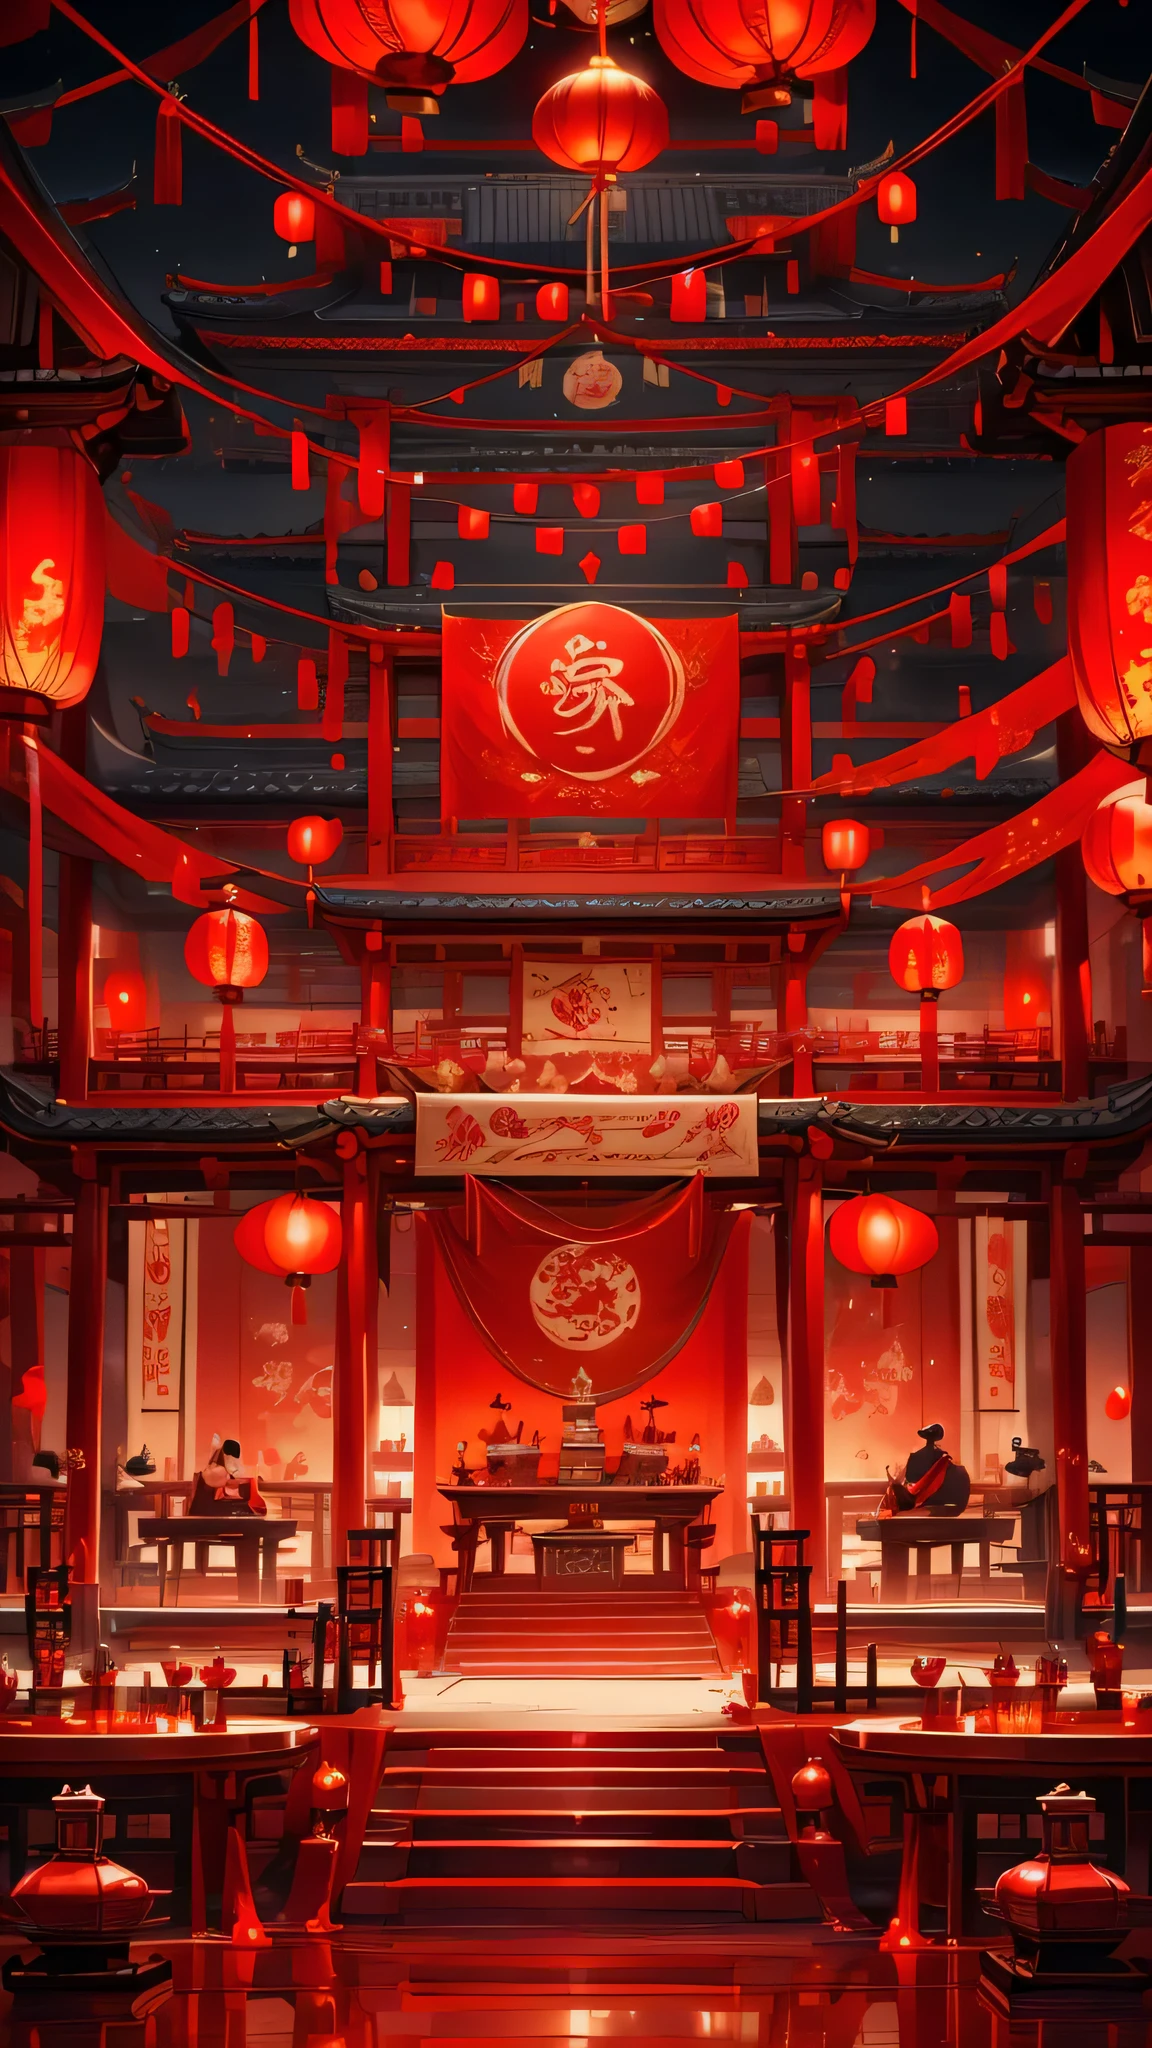 CNY， Red Wedding, table, china city , Thongbu lamp ， Quixel Megascans rendering , high detail , 8k，red lantern speechless，red ribbon hanging， Red，festive，nobody，Red decoration on background，Red，Pixar, charming, Cartoonish，Business posters，There are decorations around，happiness,